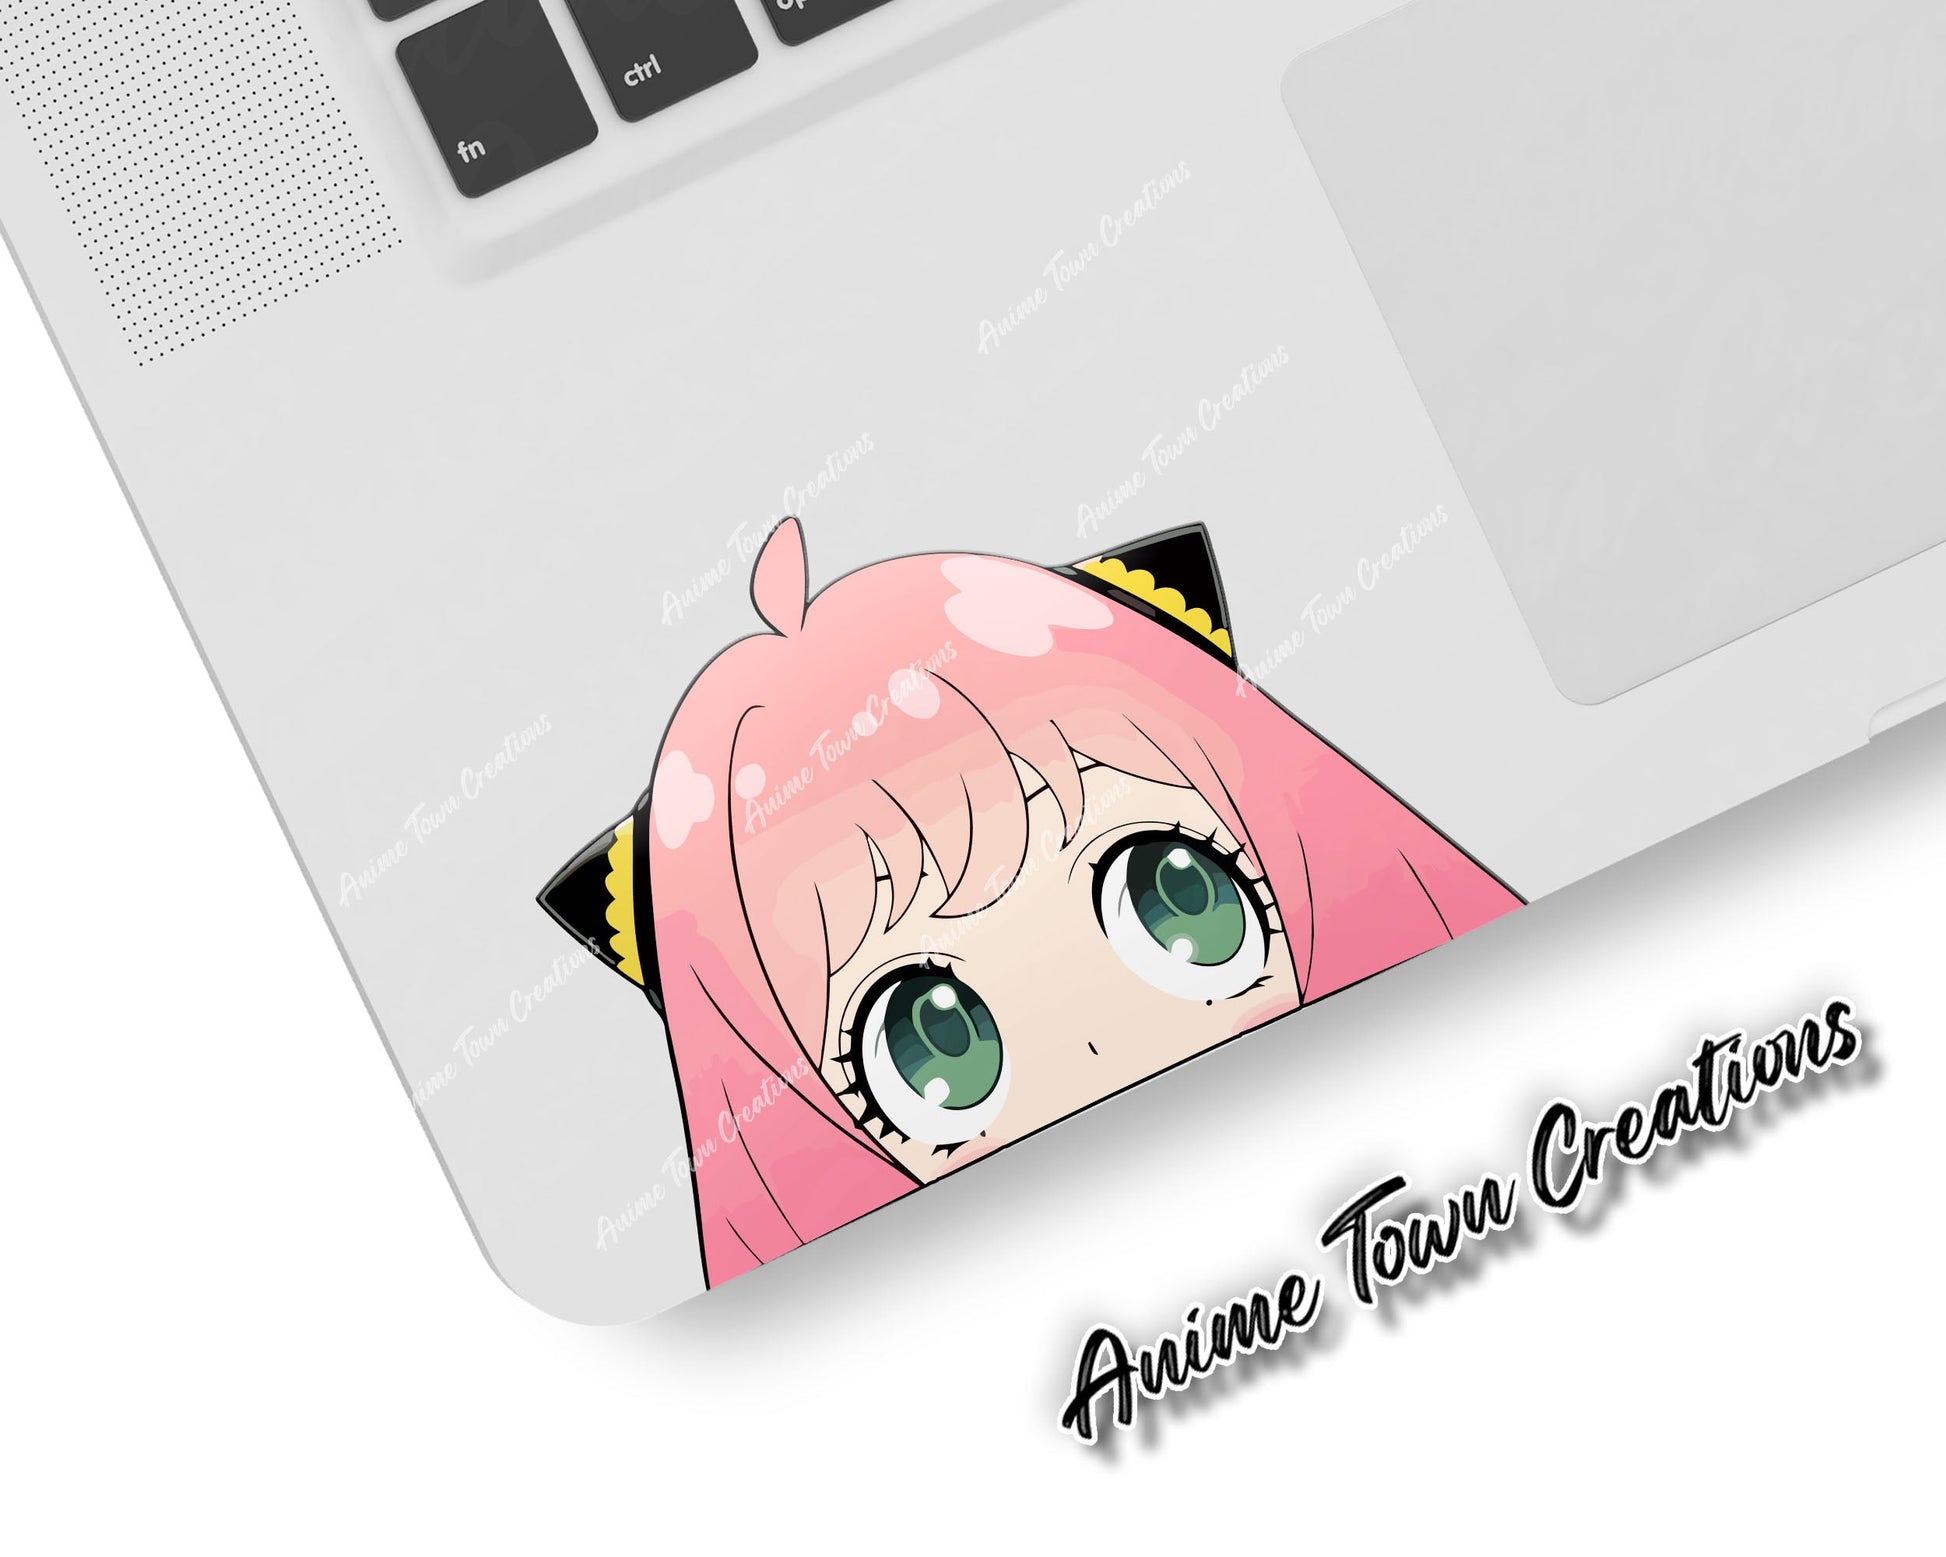 Anime Town Creations Sticker Spy X Family Anya Forger Peeker 5" Accessories - Anime Spy x Family Sticker